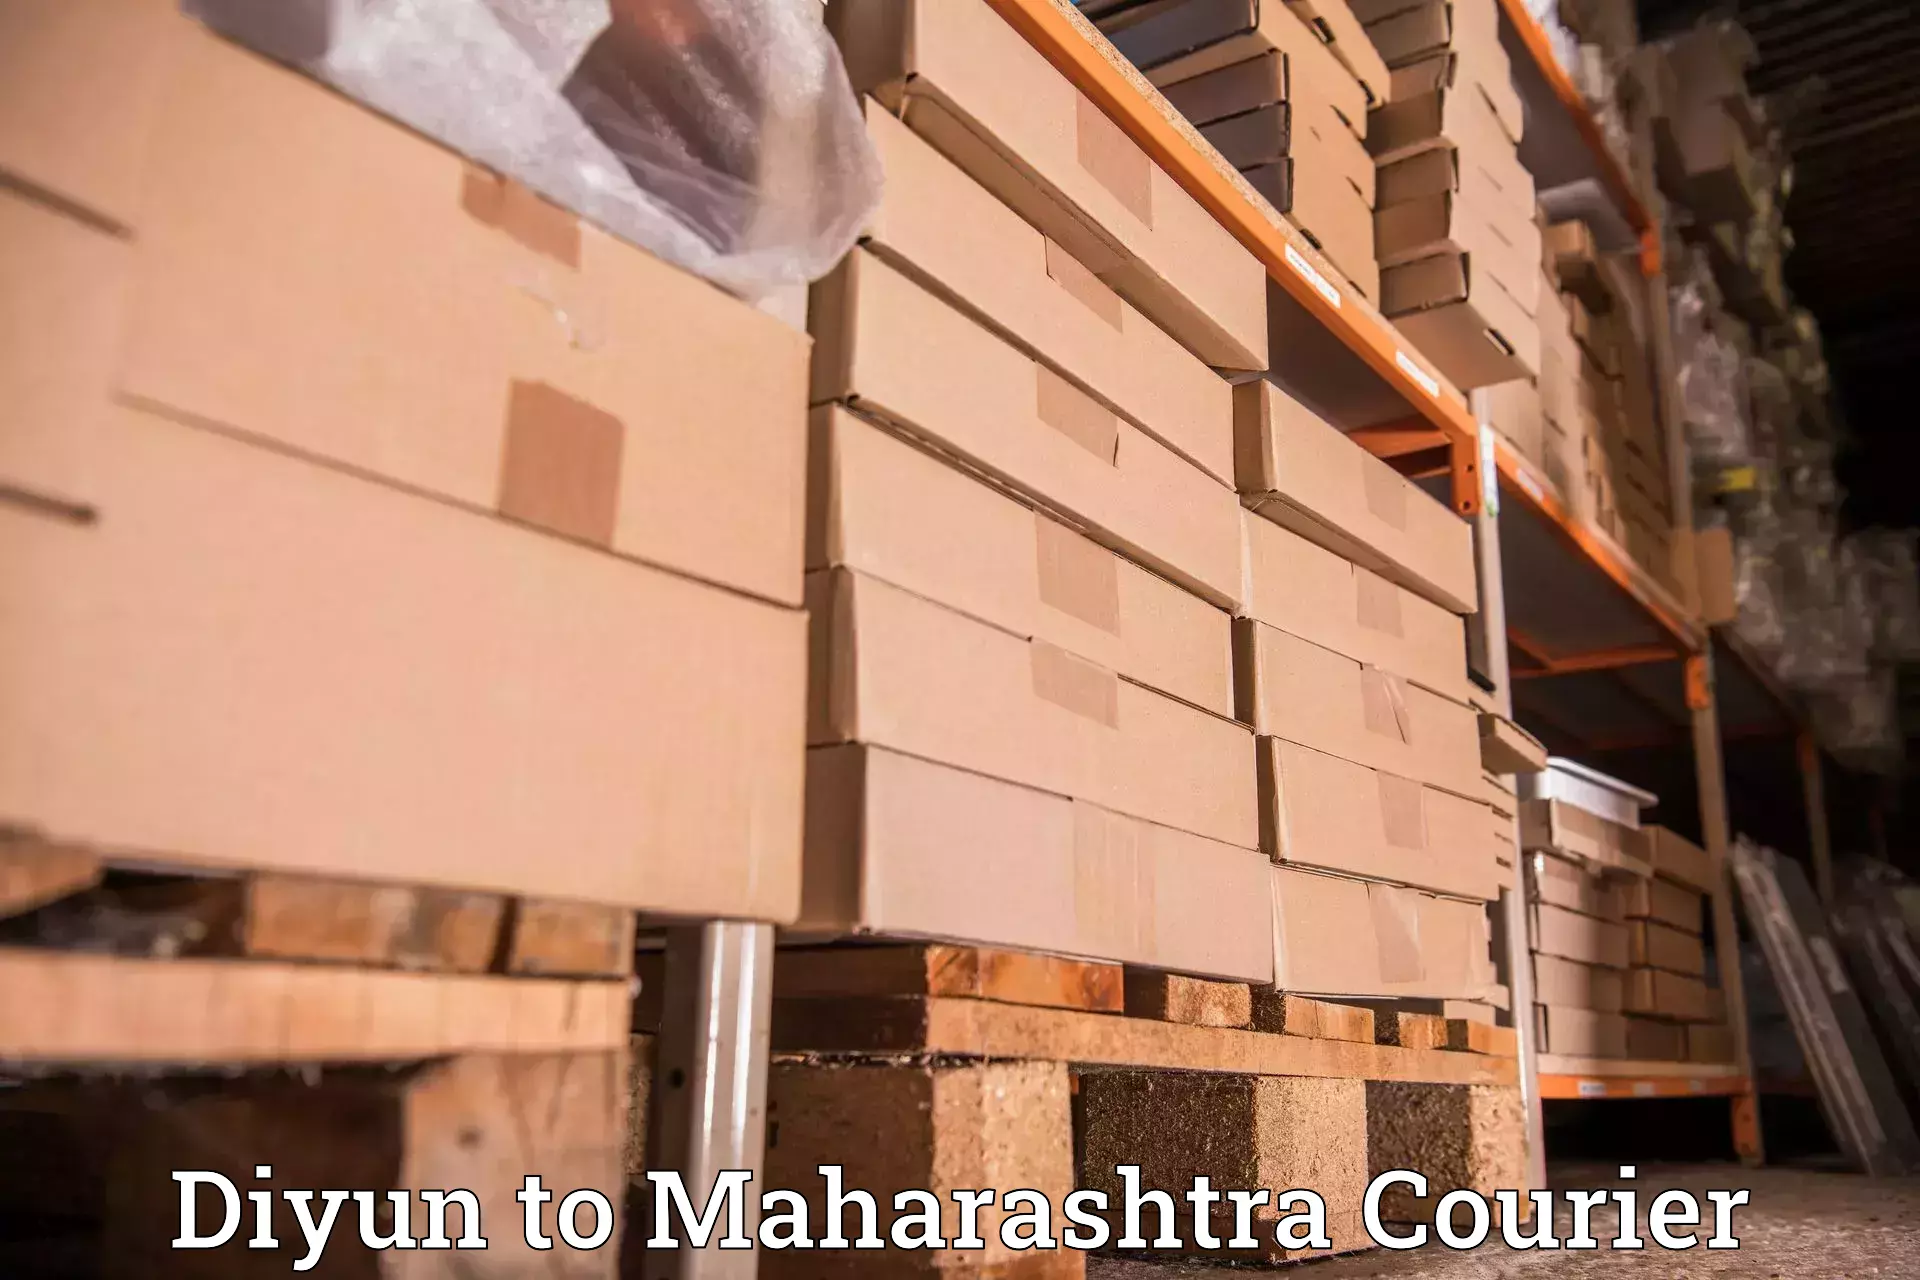 Business delivery service Diyun to Maharashtra